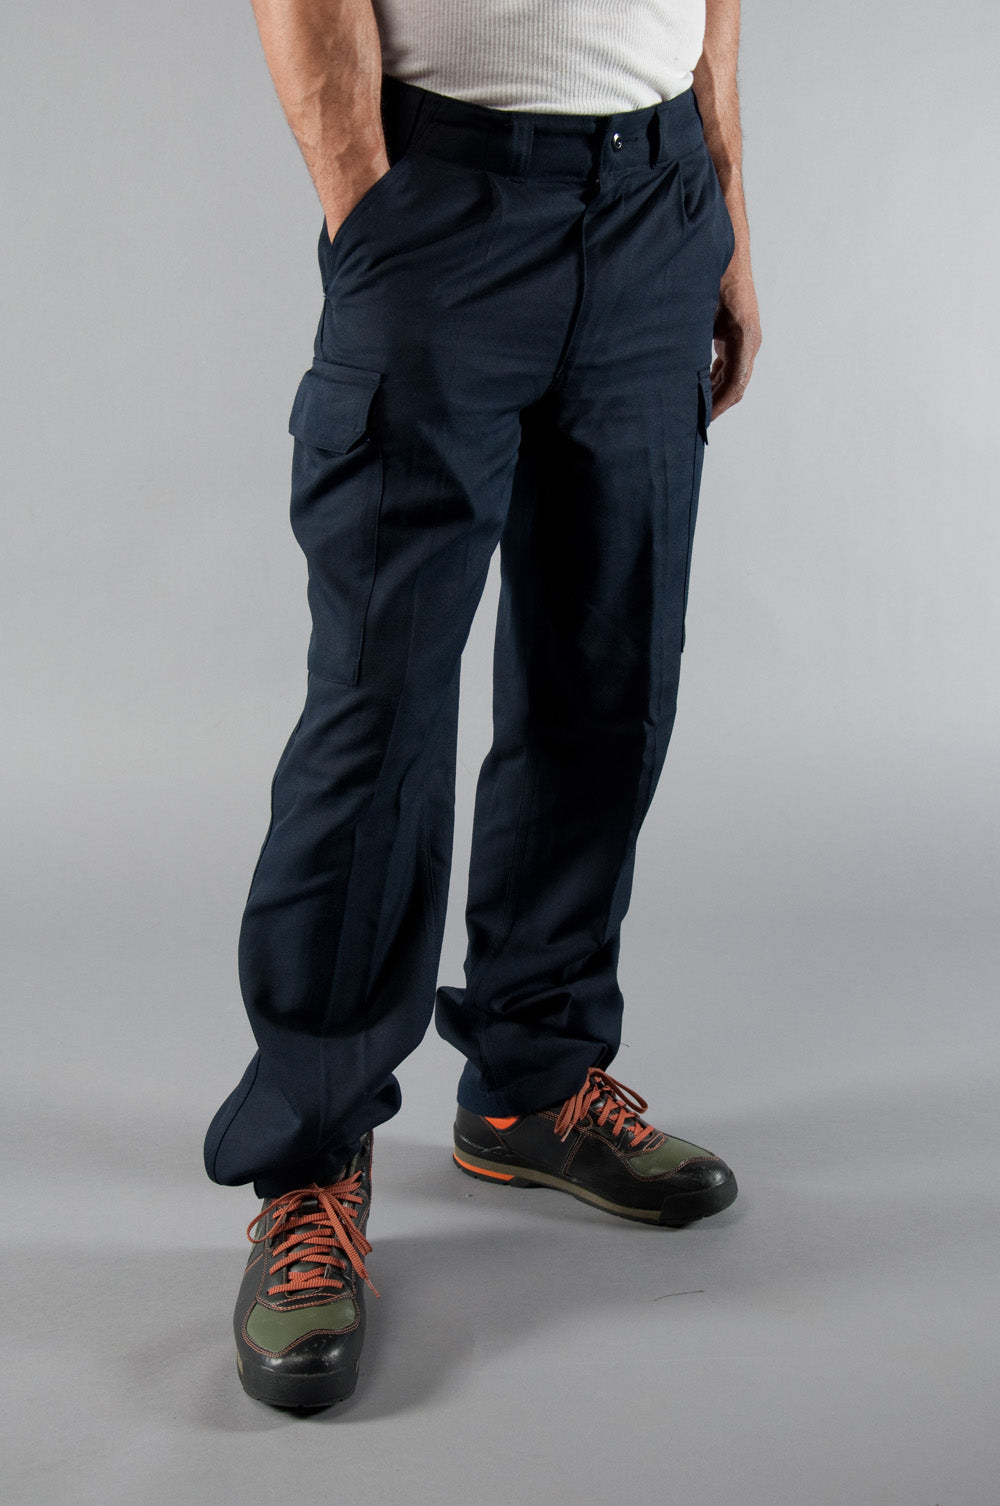 Shop Black Cargo Pants For Men Online At Best Price In India –  AestheticNation